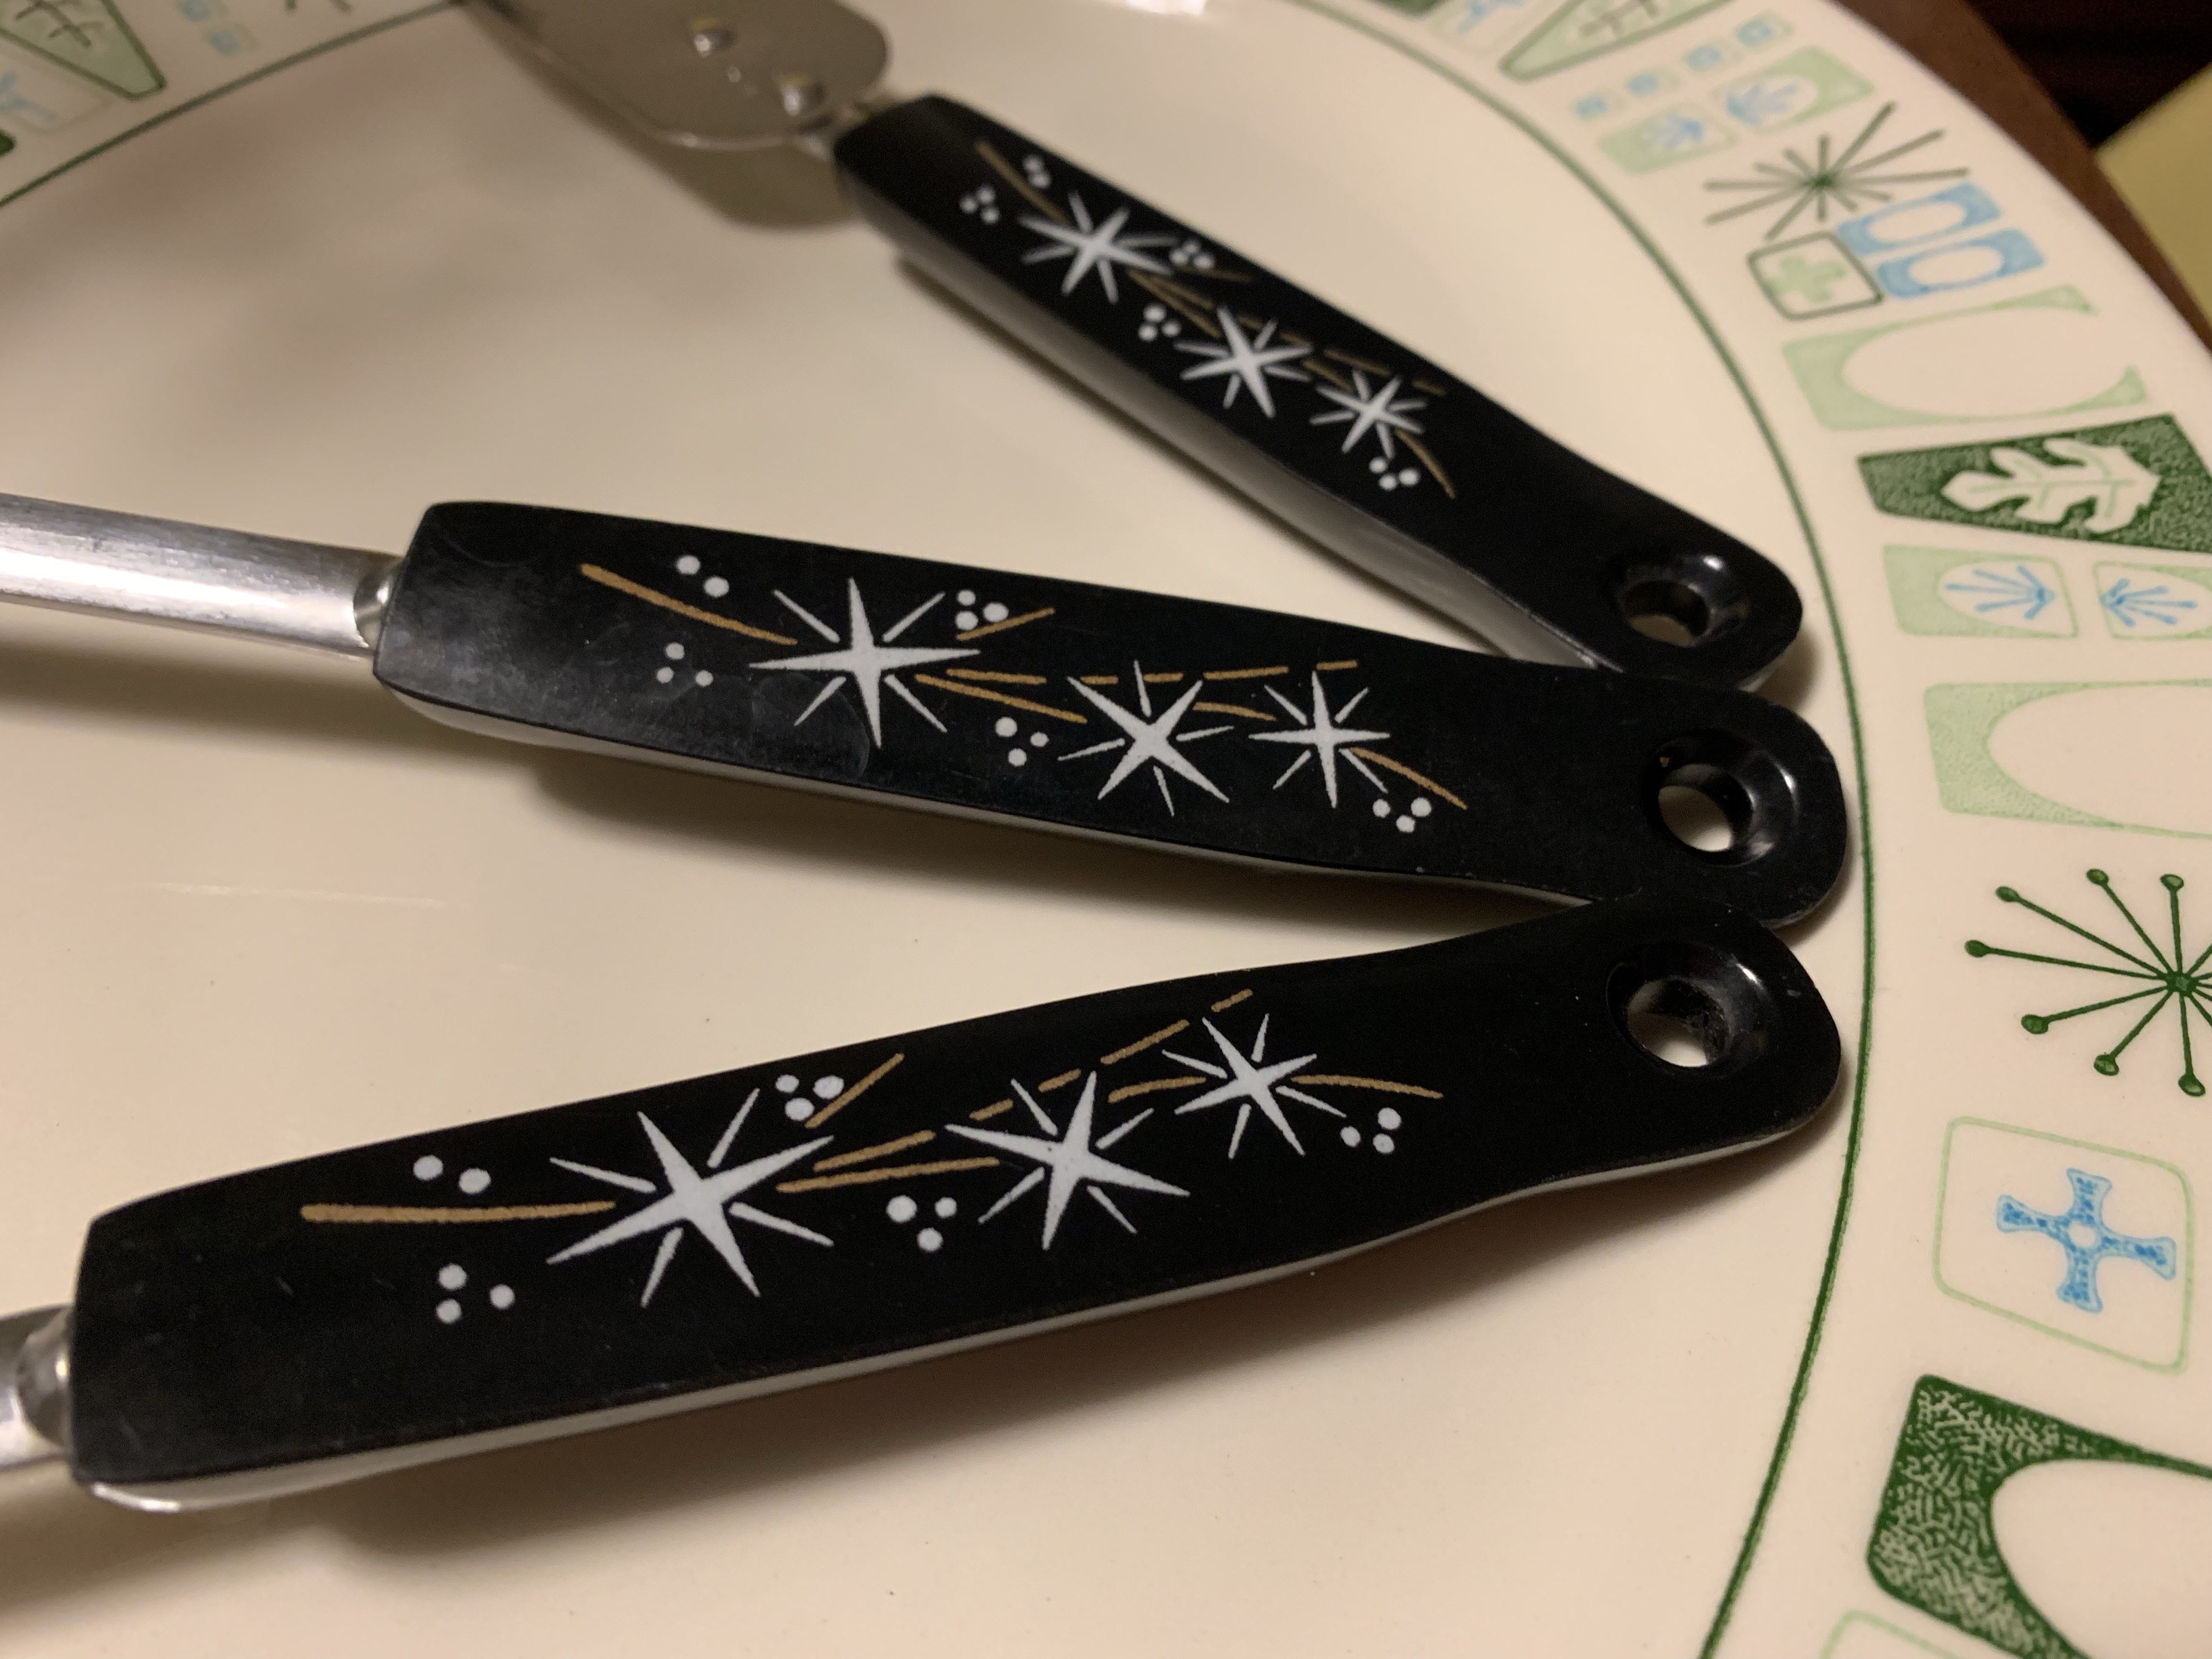 Black knives with white stars.